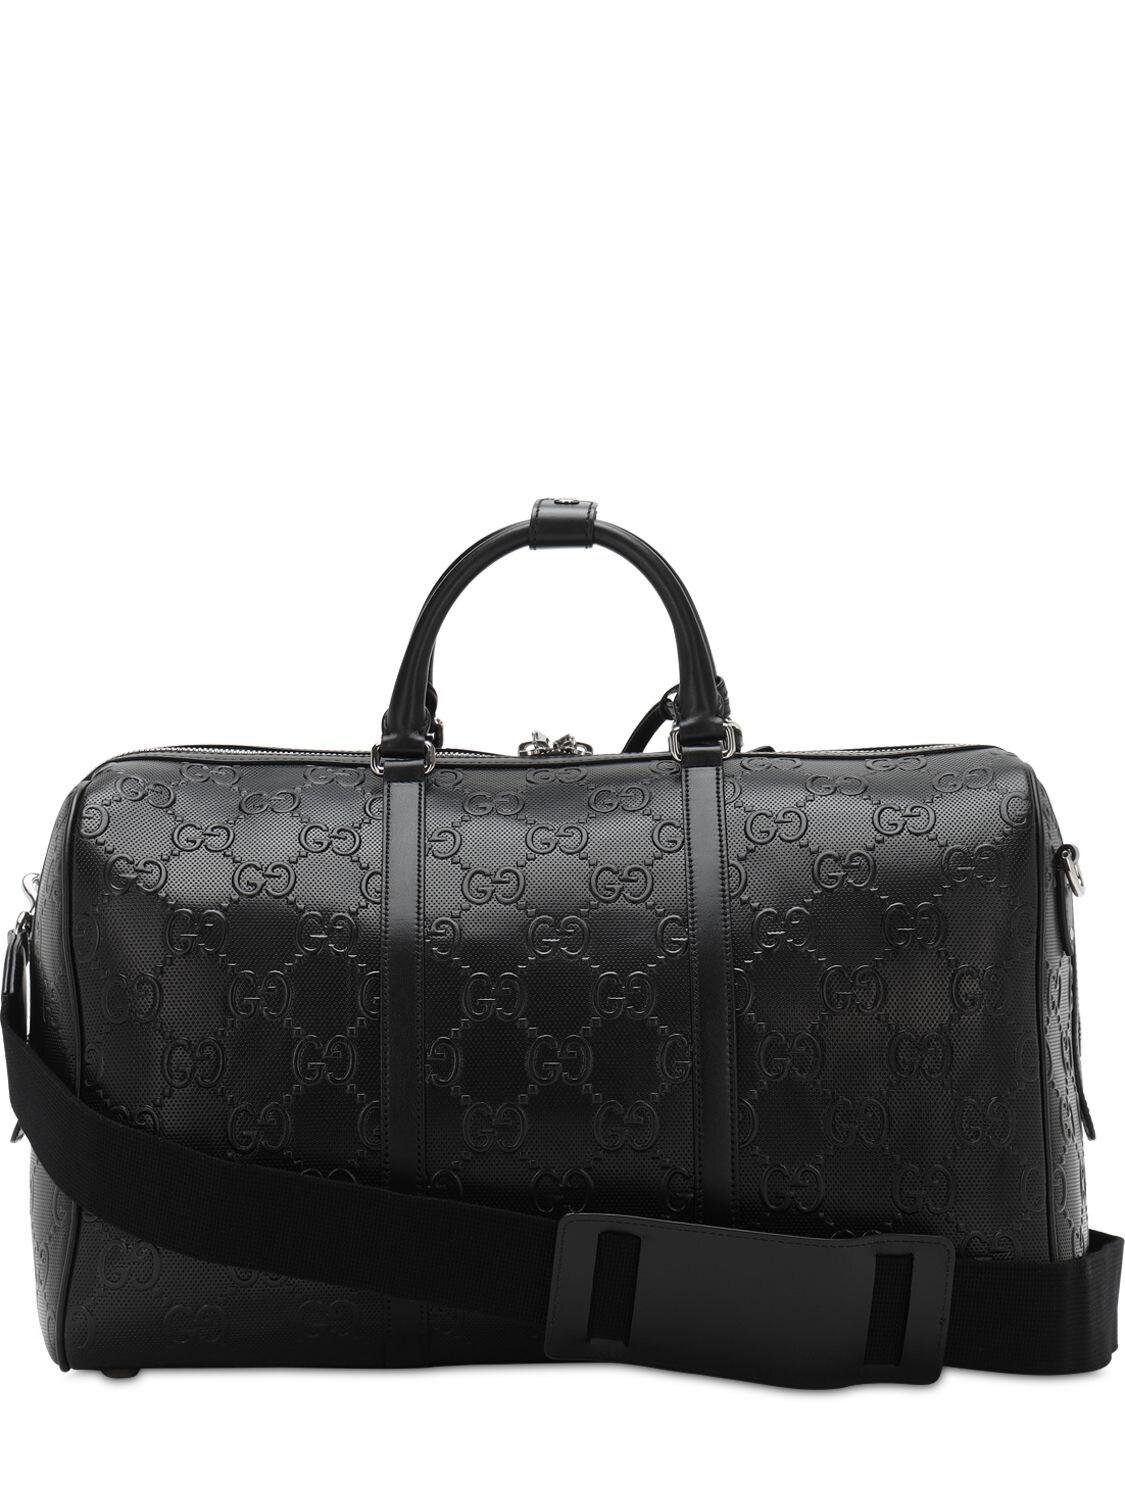 Gucci Leather GG Embossed Duffle Bag in Black for Men - Save 8% | Lyst